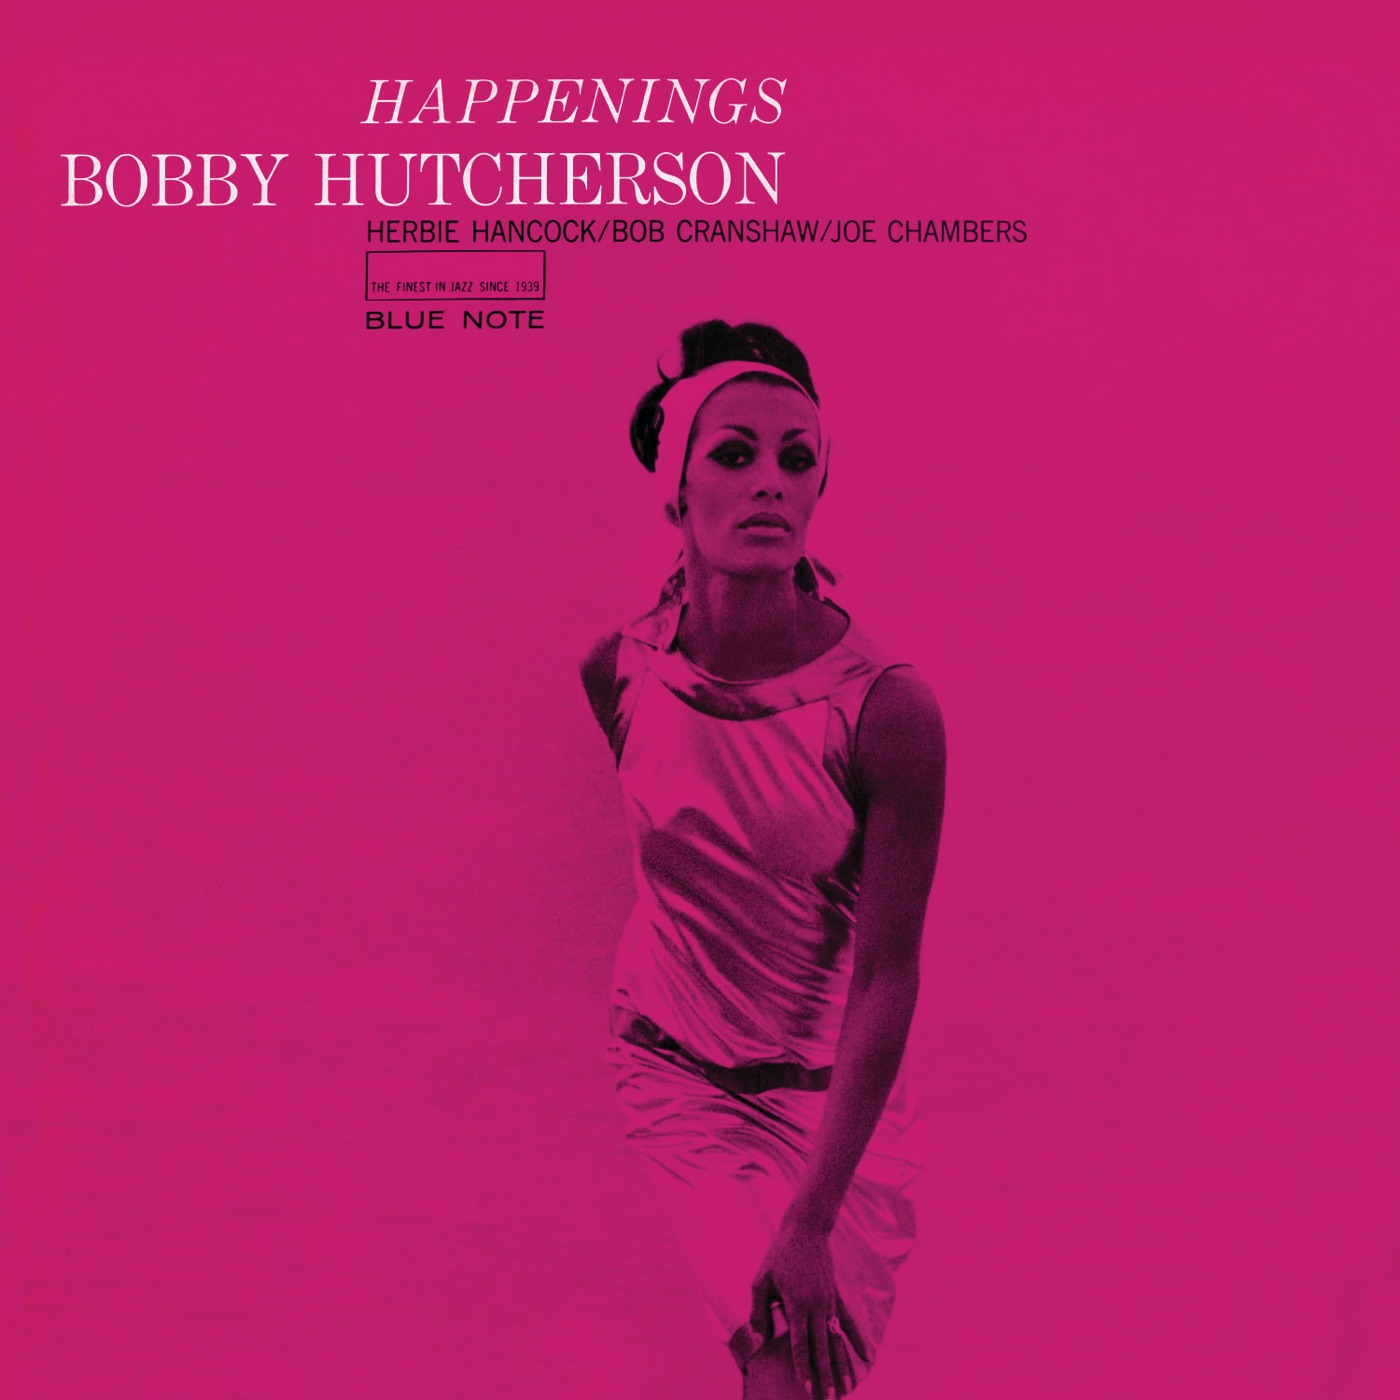 Happenings by Bobby Hutcherson